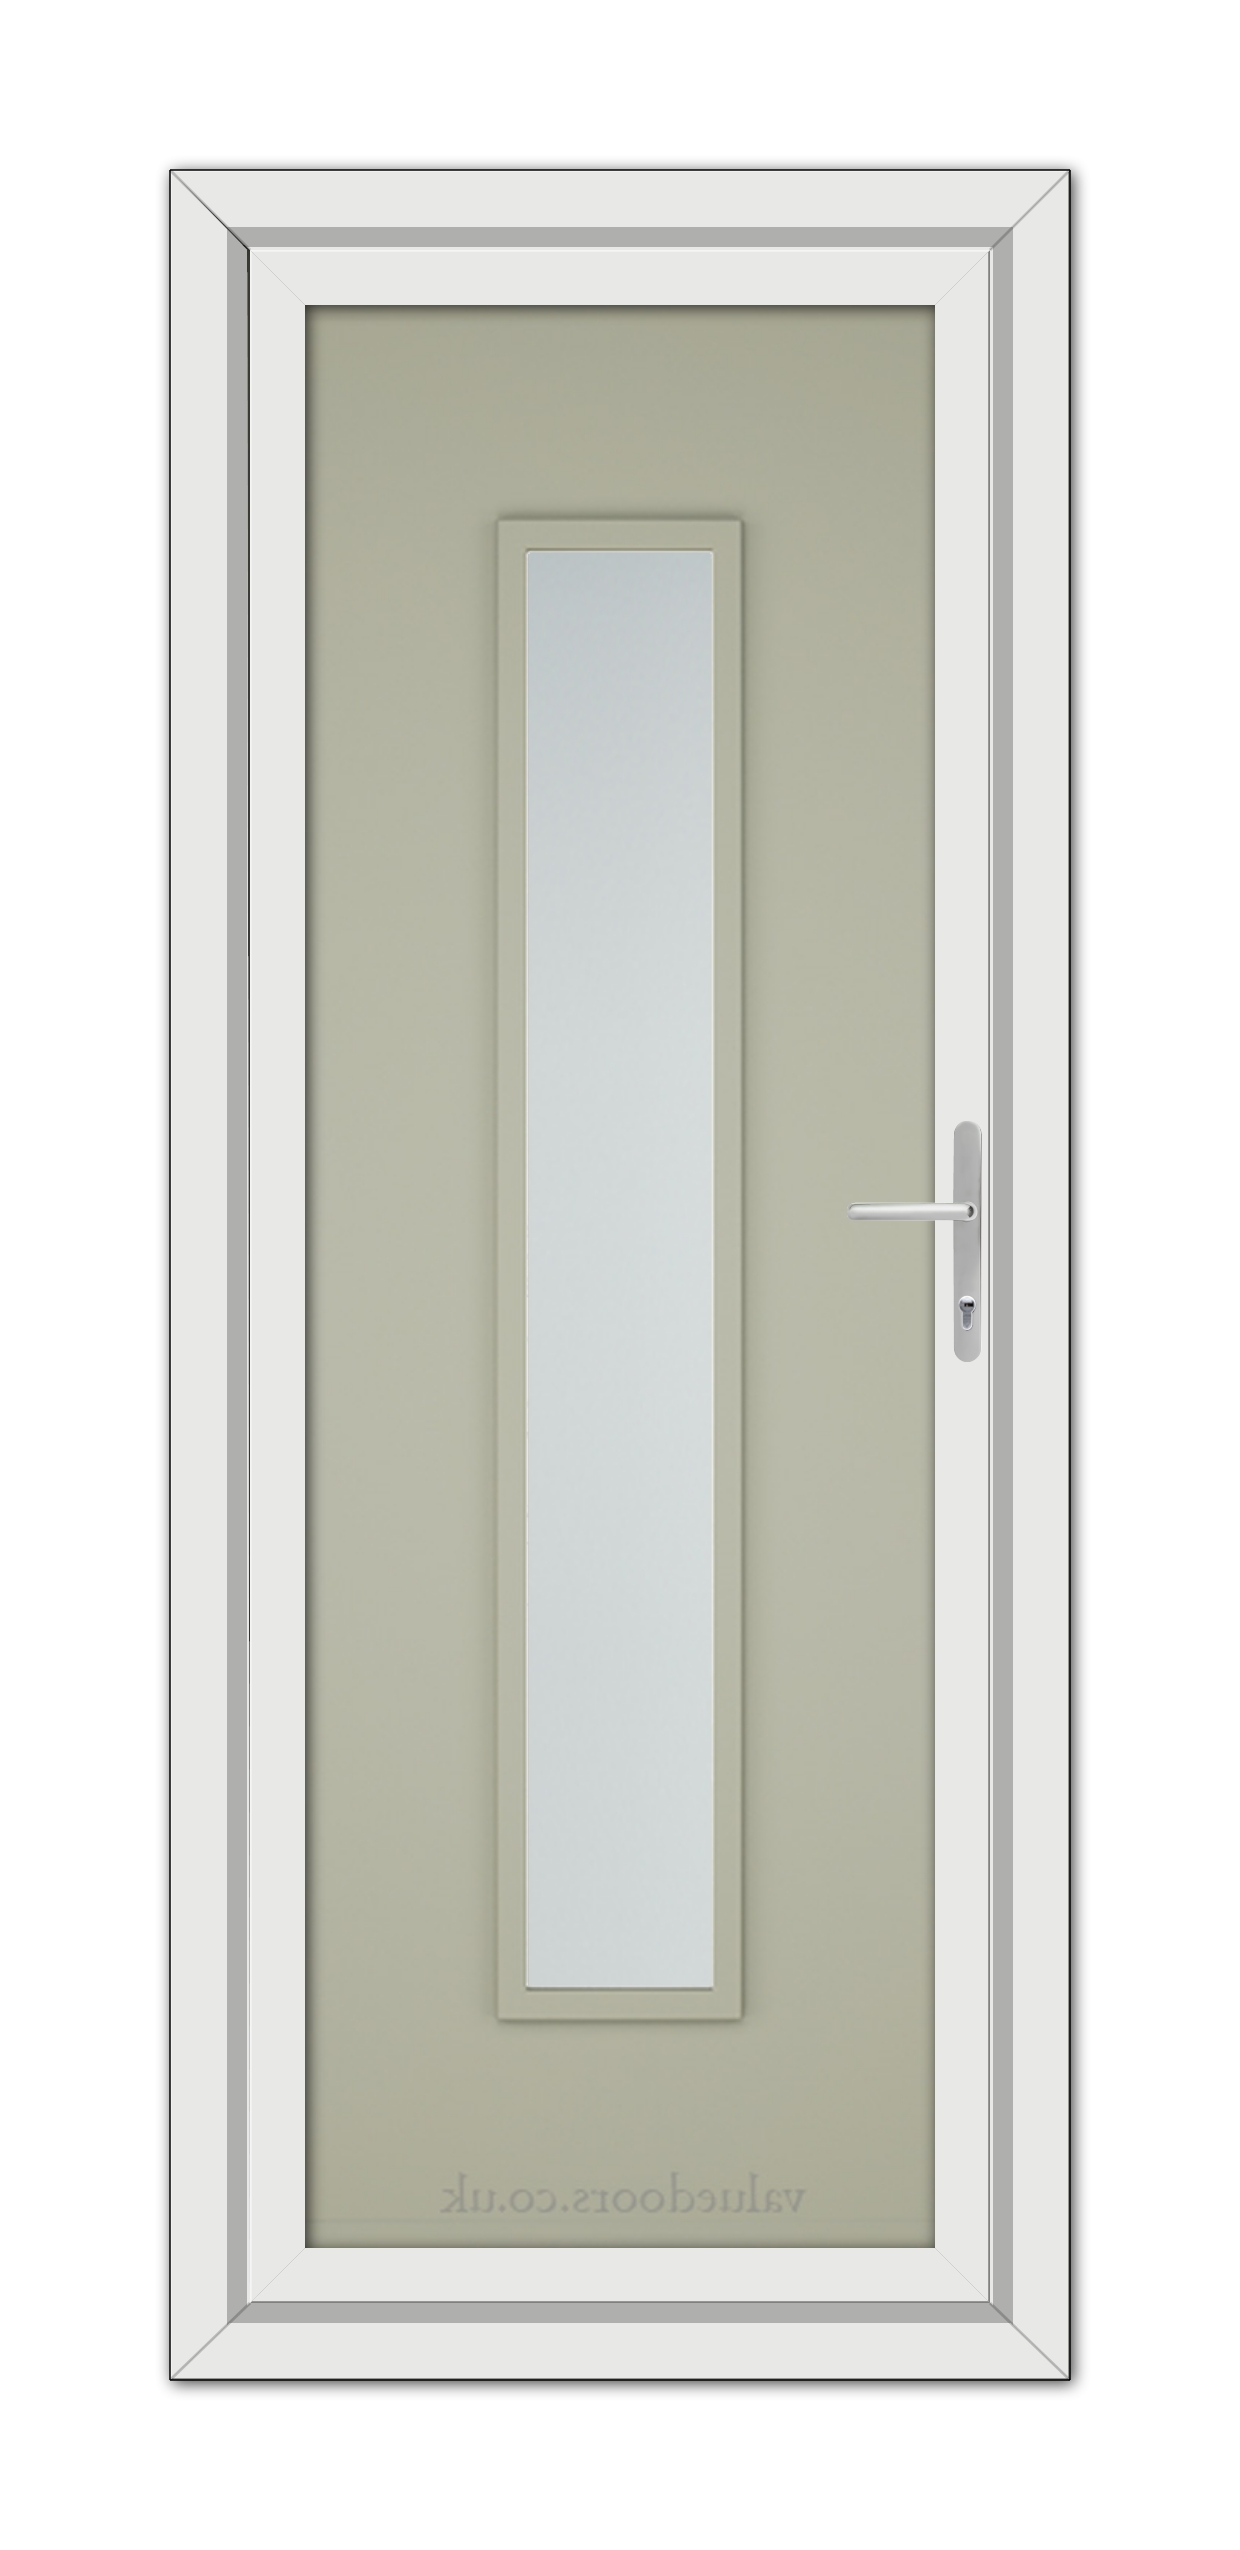 A Agate Grey Modern 5101 uPVC door with a vertical rectangular glass pane and a silver handle, set within a white frame.